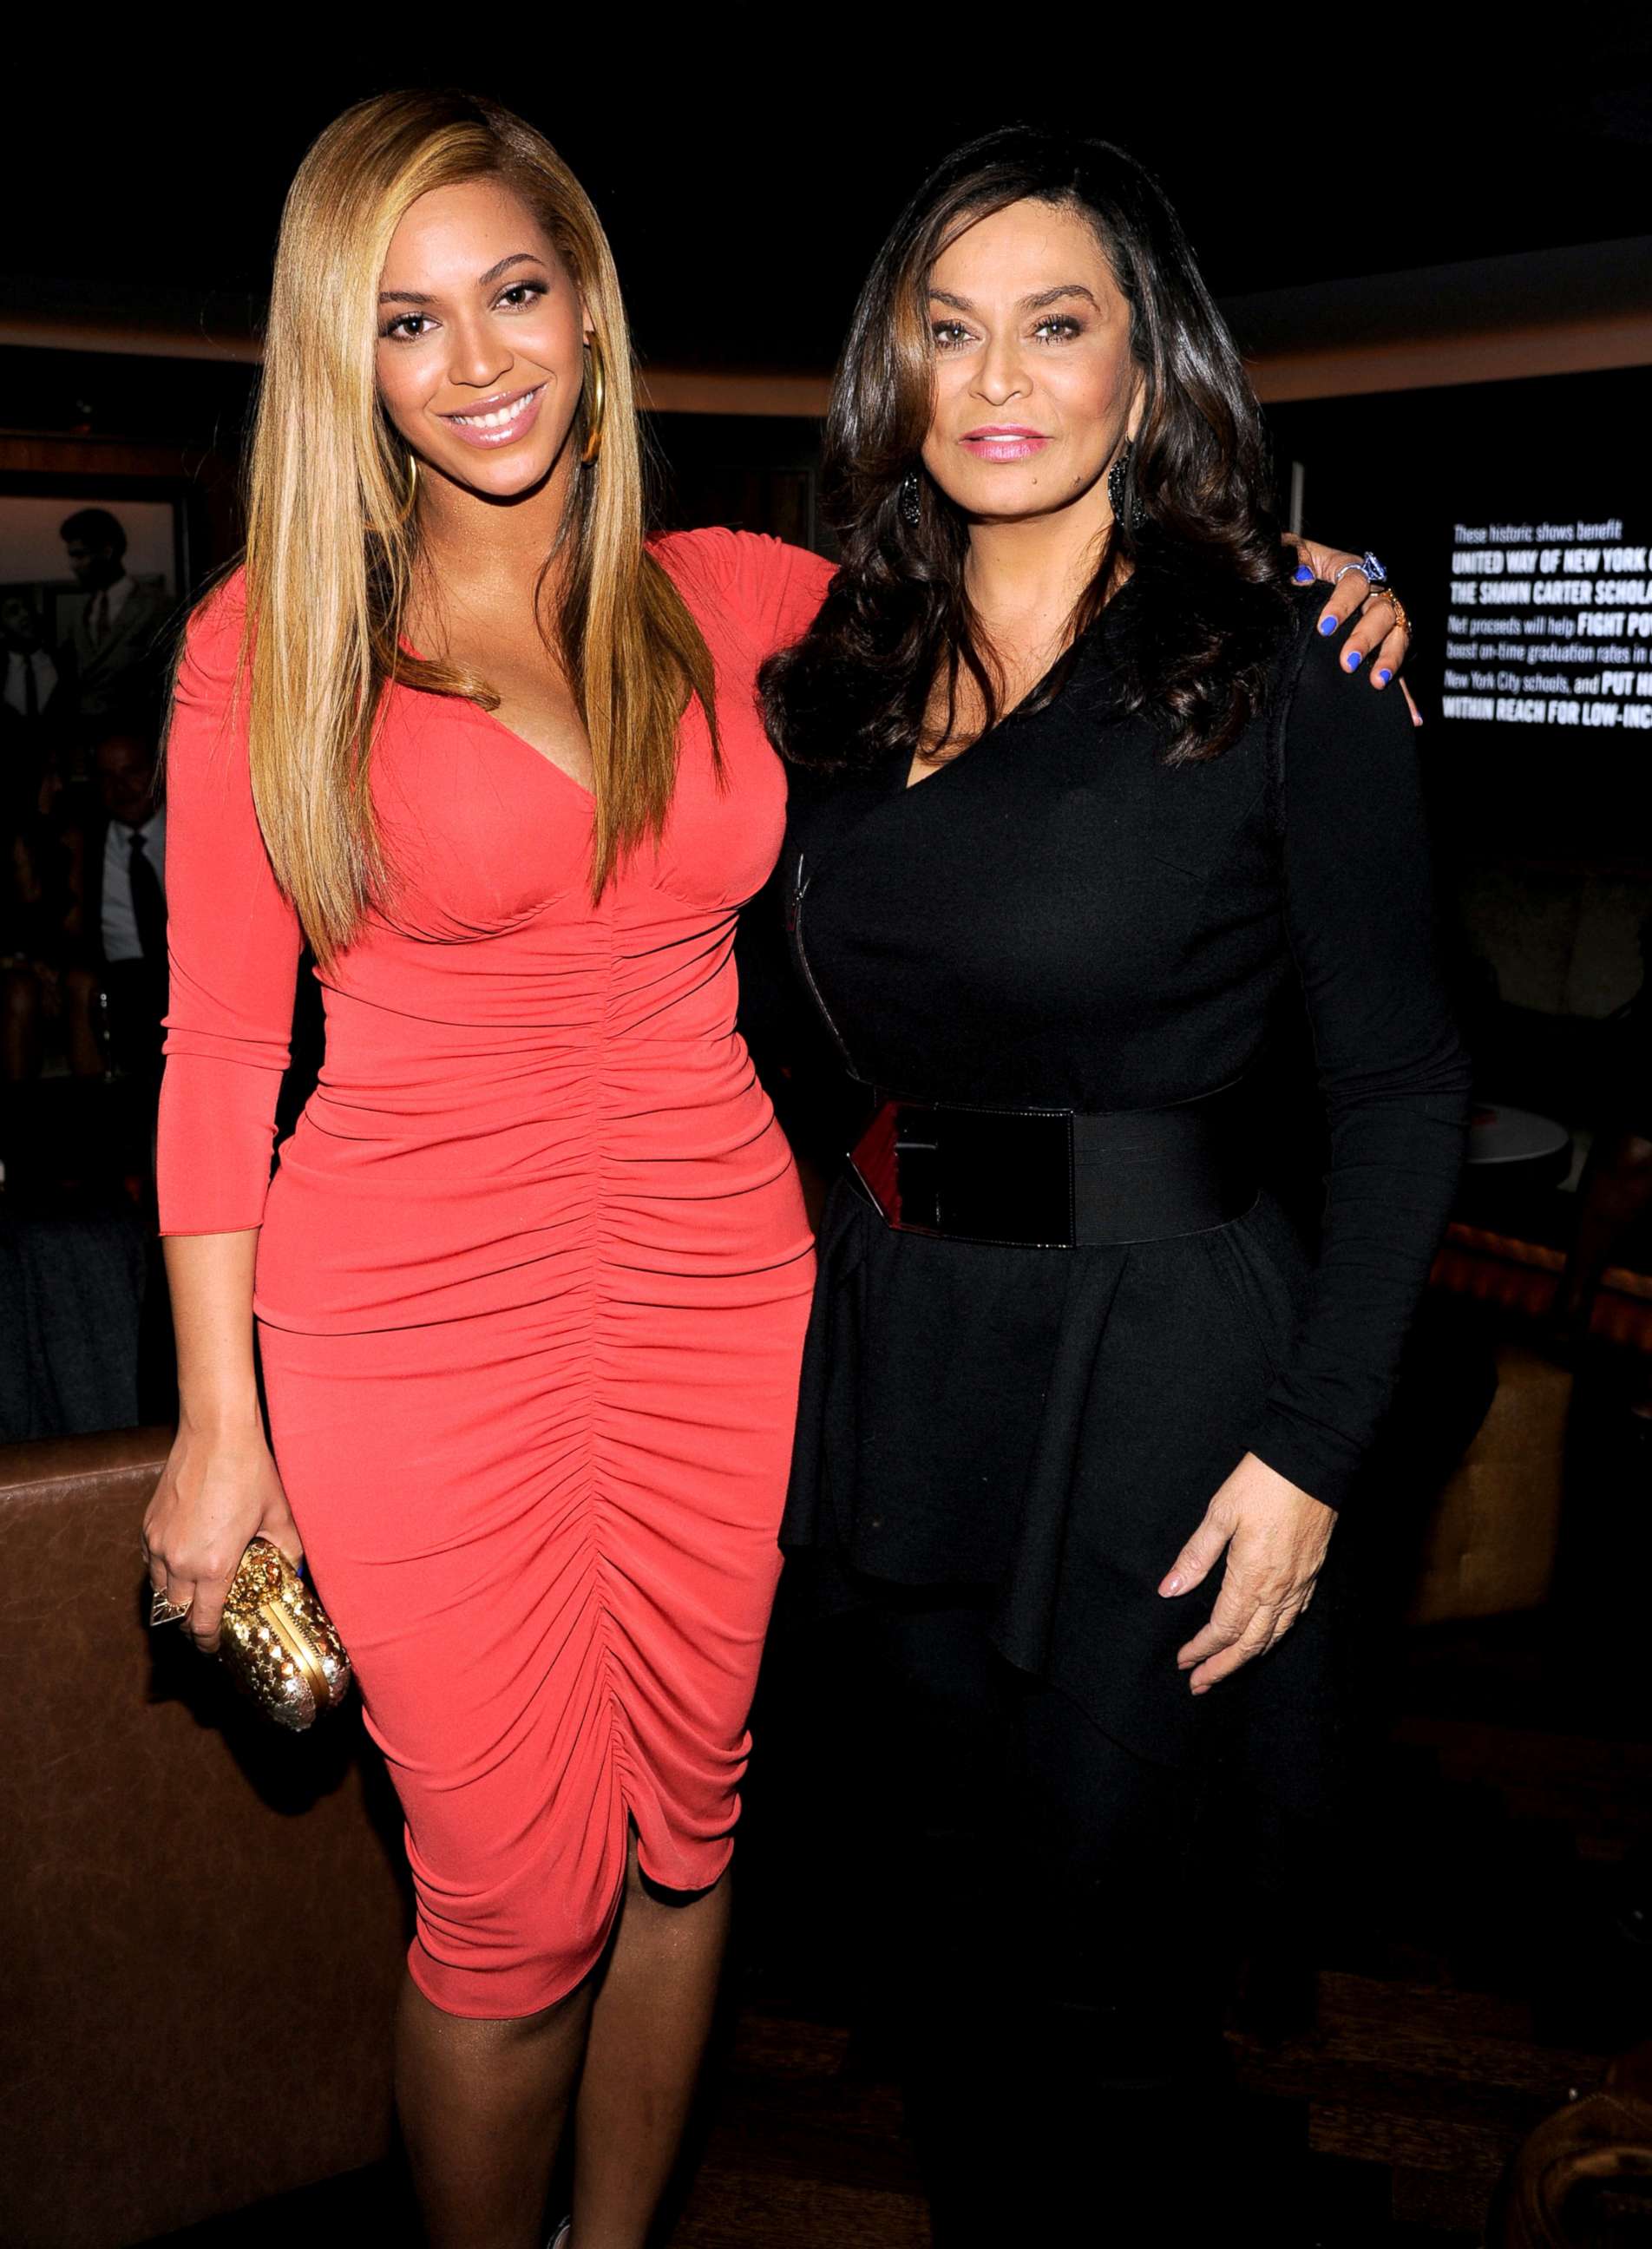 PHOTO: Beyonce and Tina Knowles at the 40 / 40 Club, Feb. 6, 2012, in New York City.